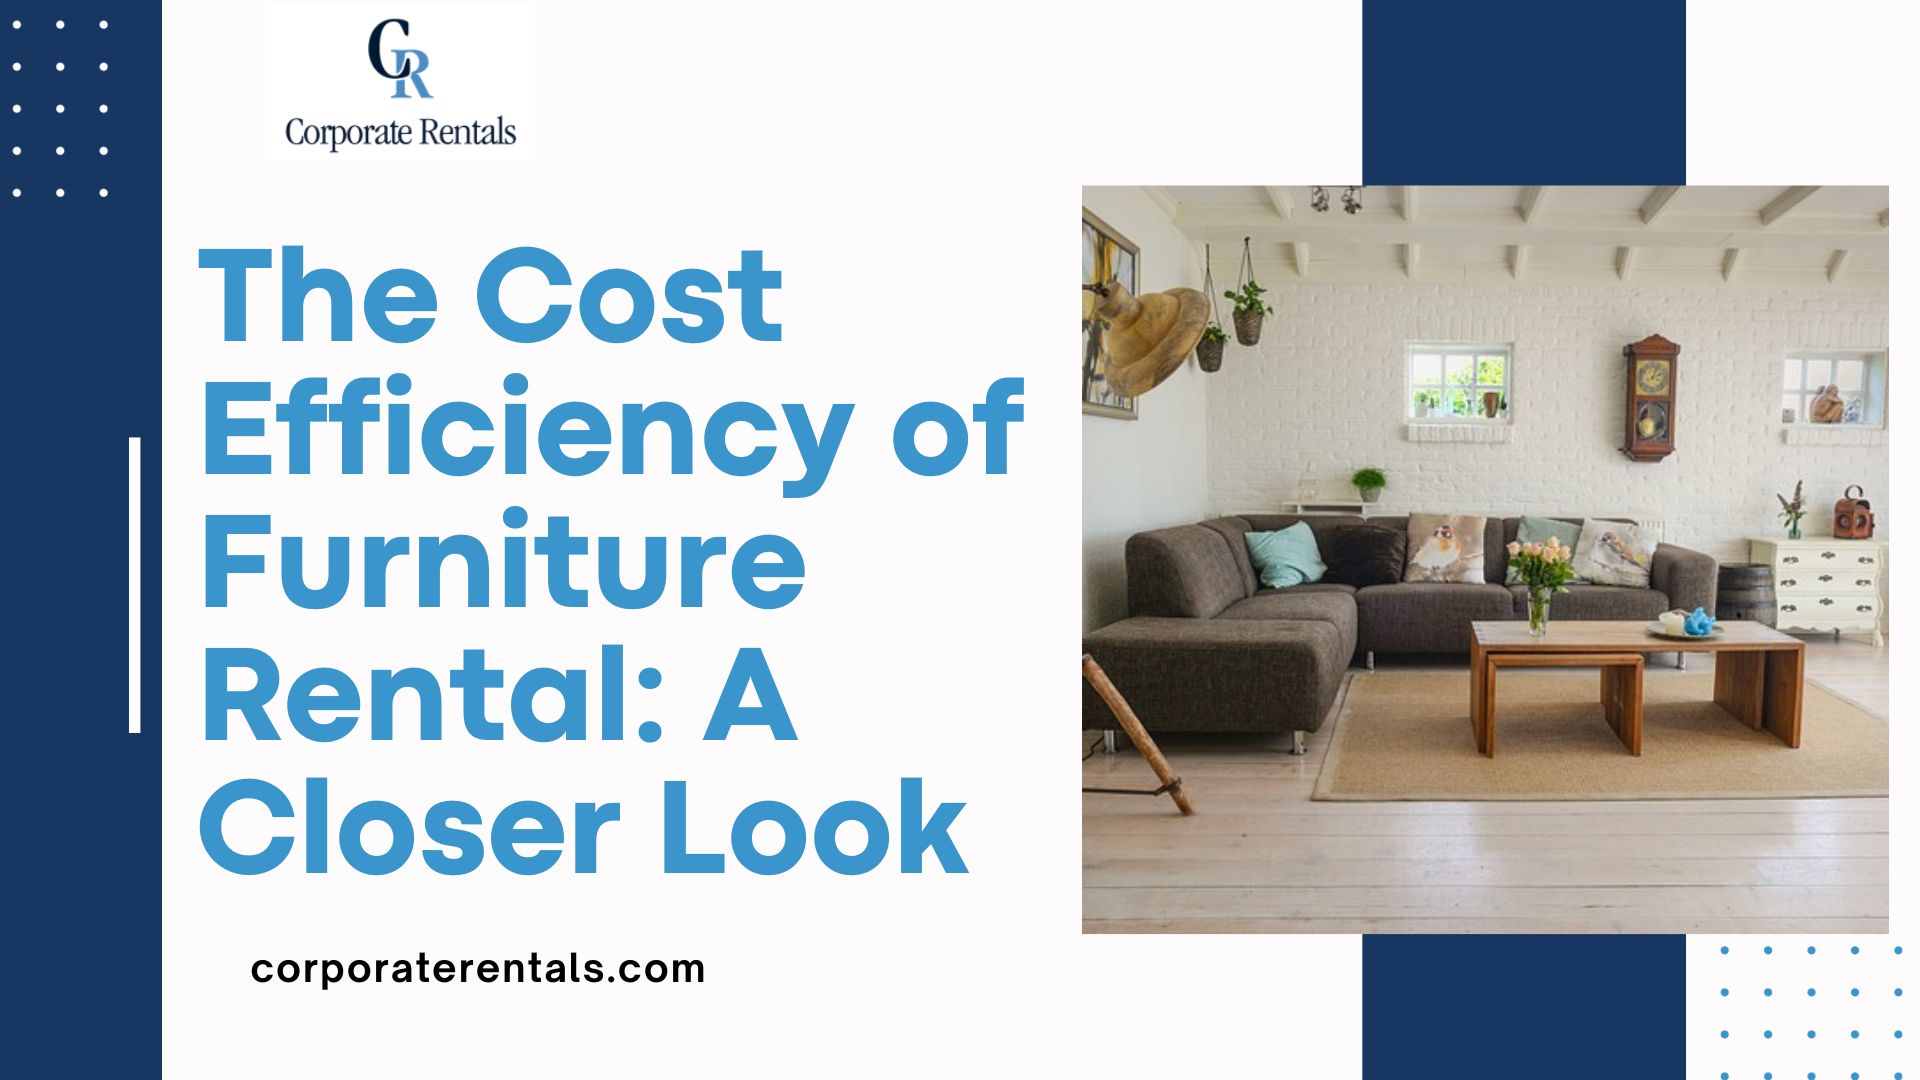 The Cost Efficiency of Furniture Rental: A Closer Look